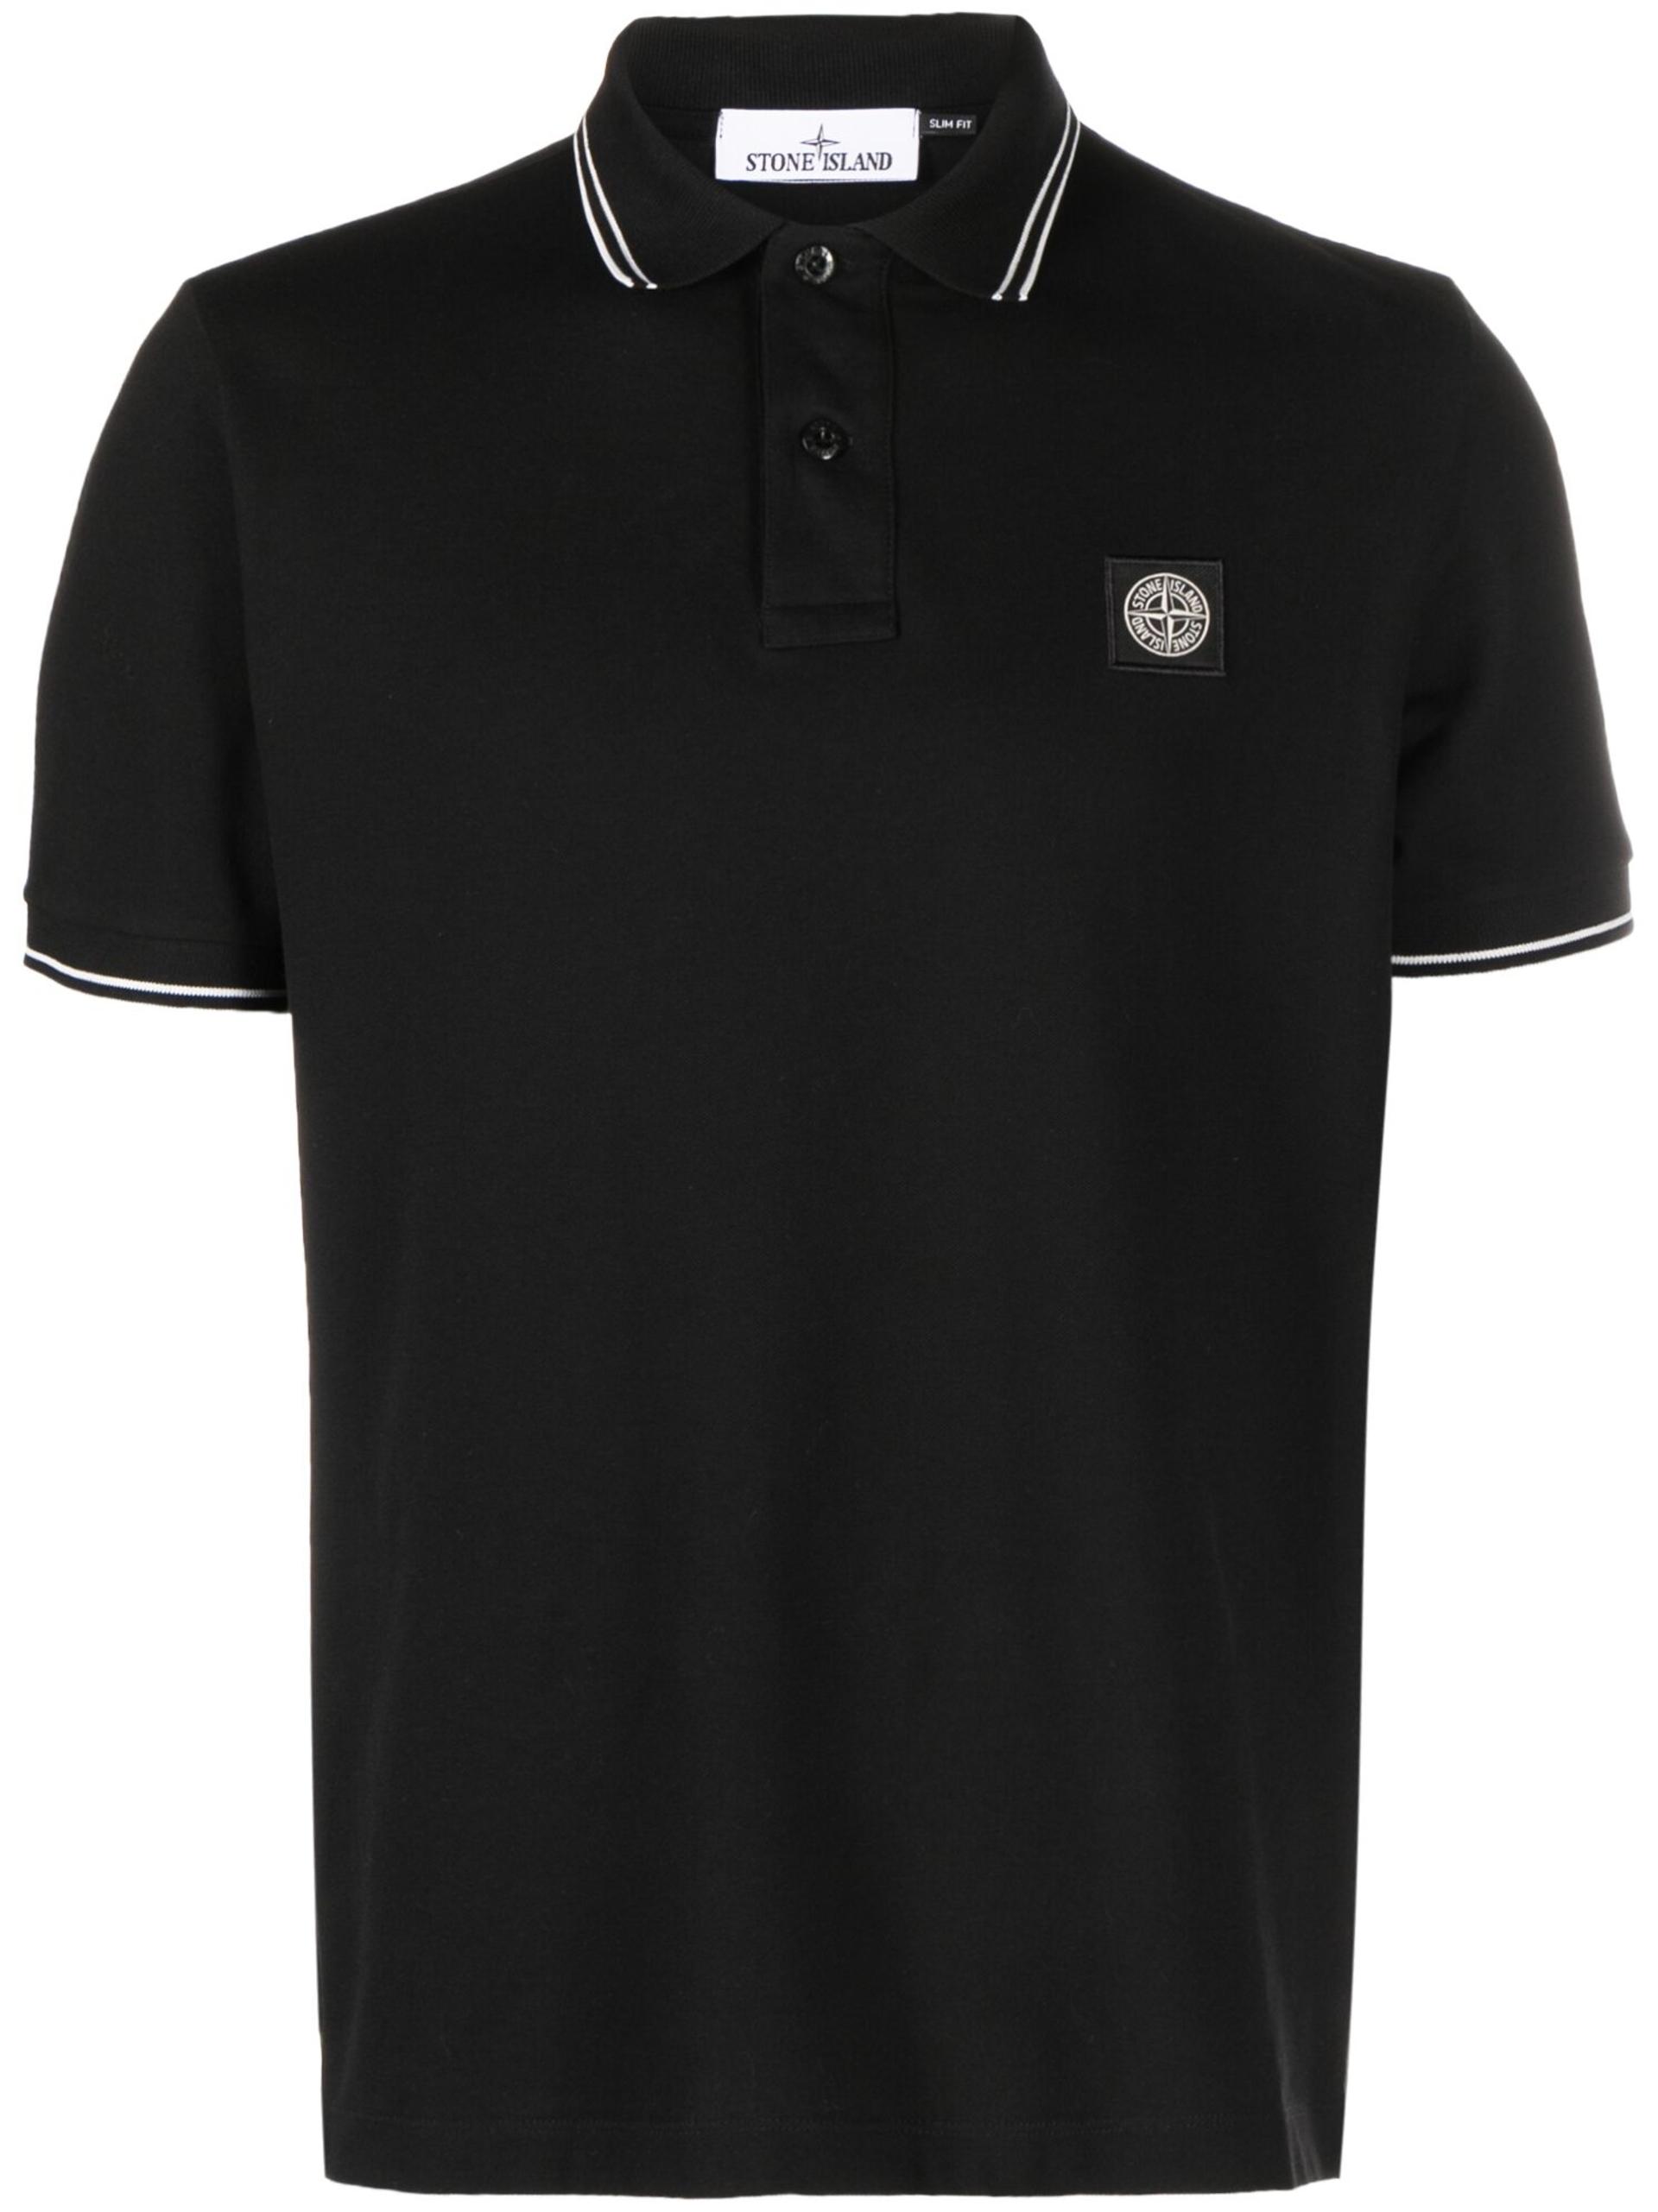 Stone Island Compass-patch Tipped Polo Shirt in Black for Men | Lyst